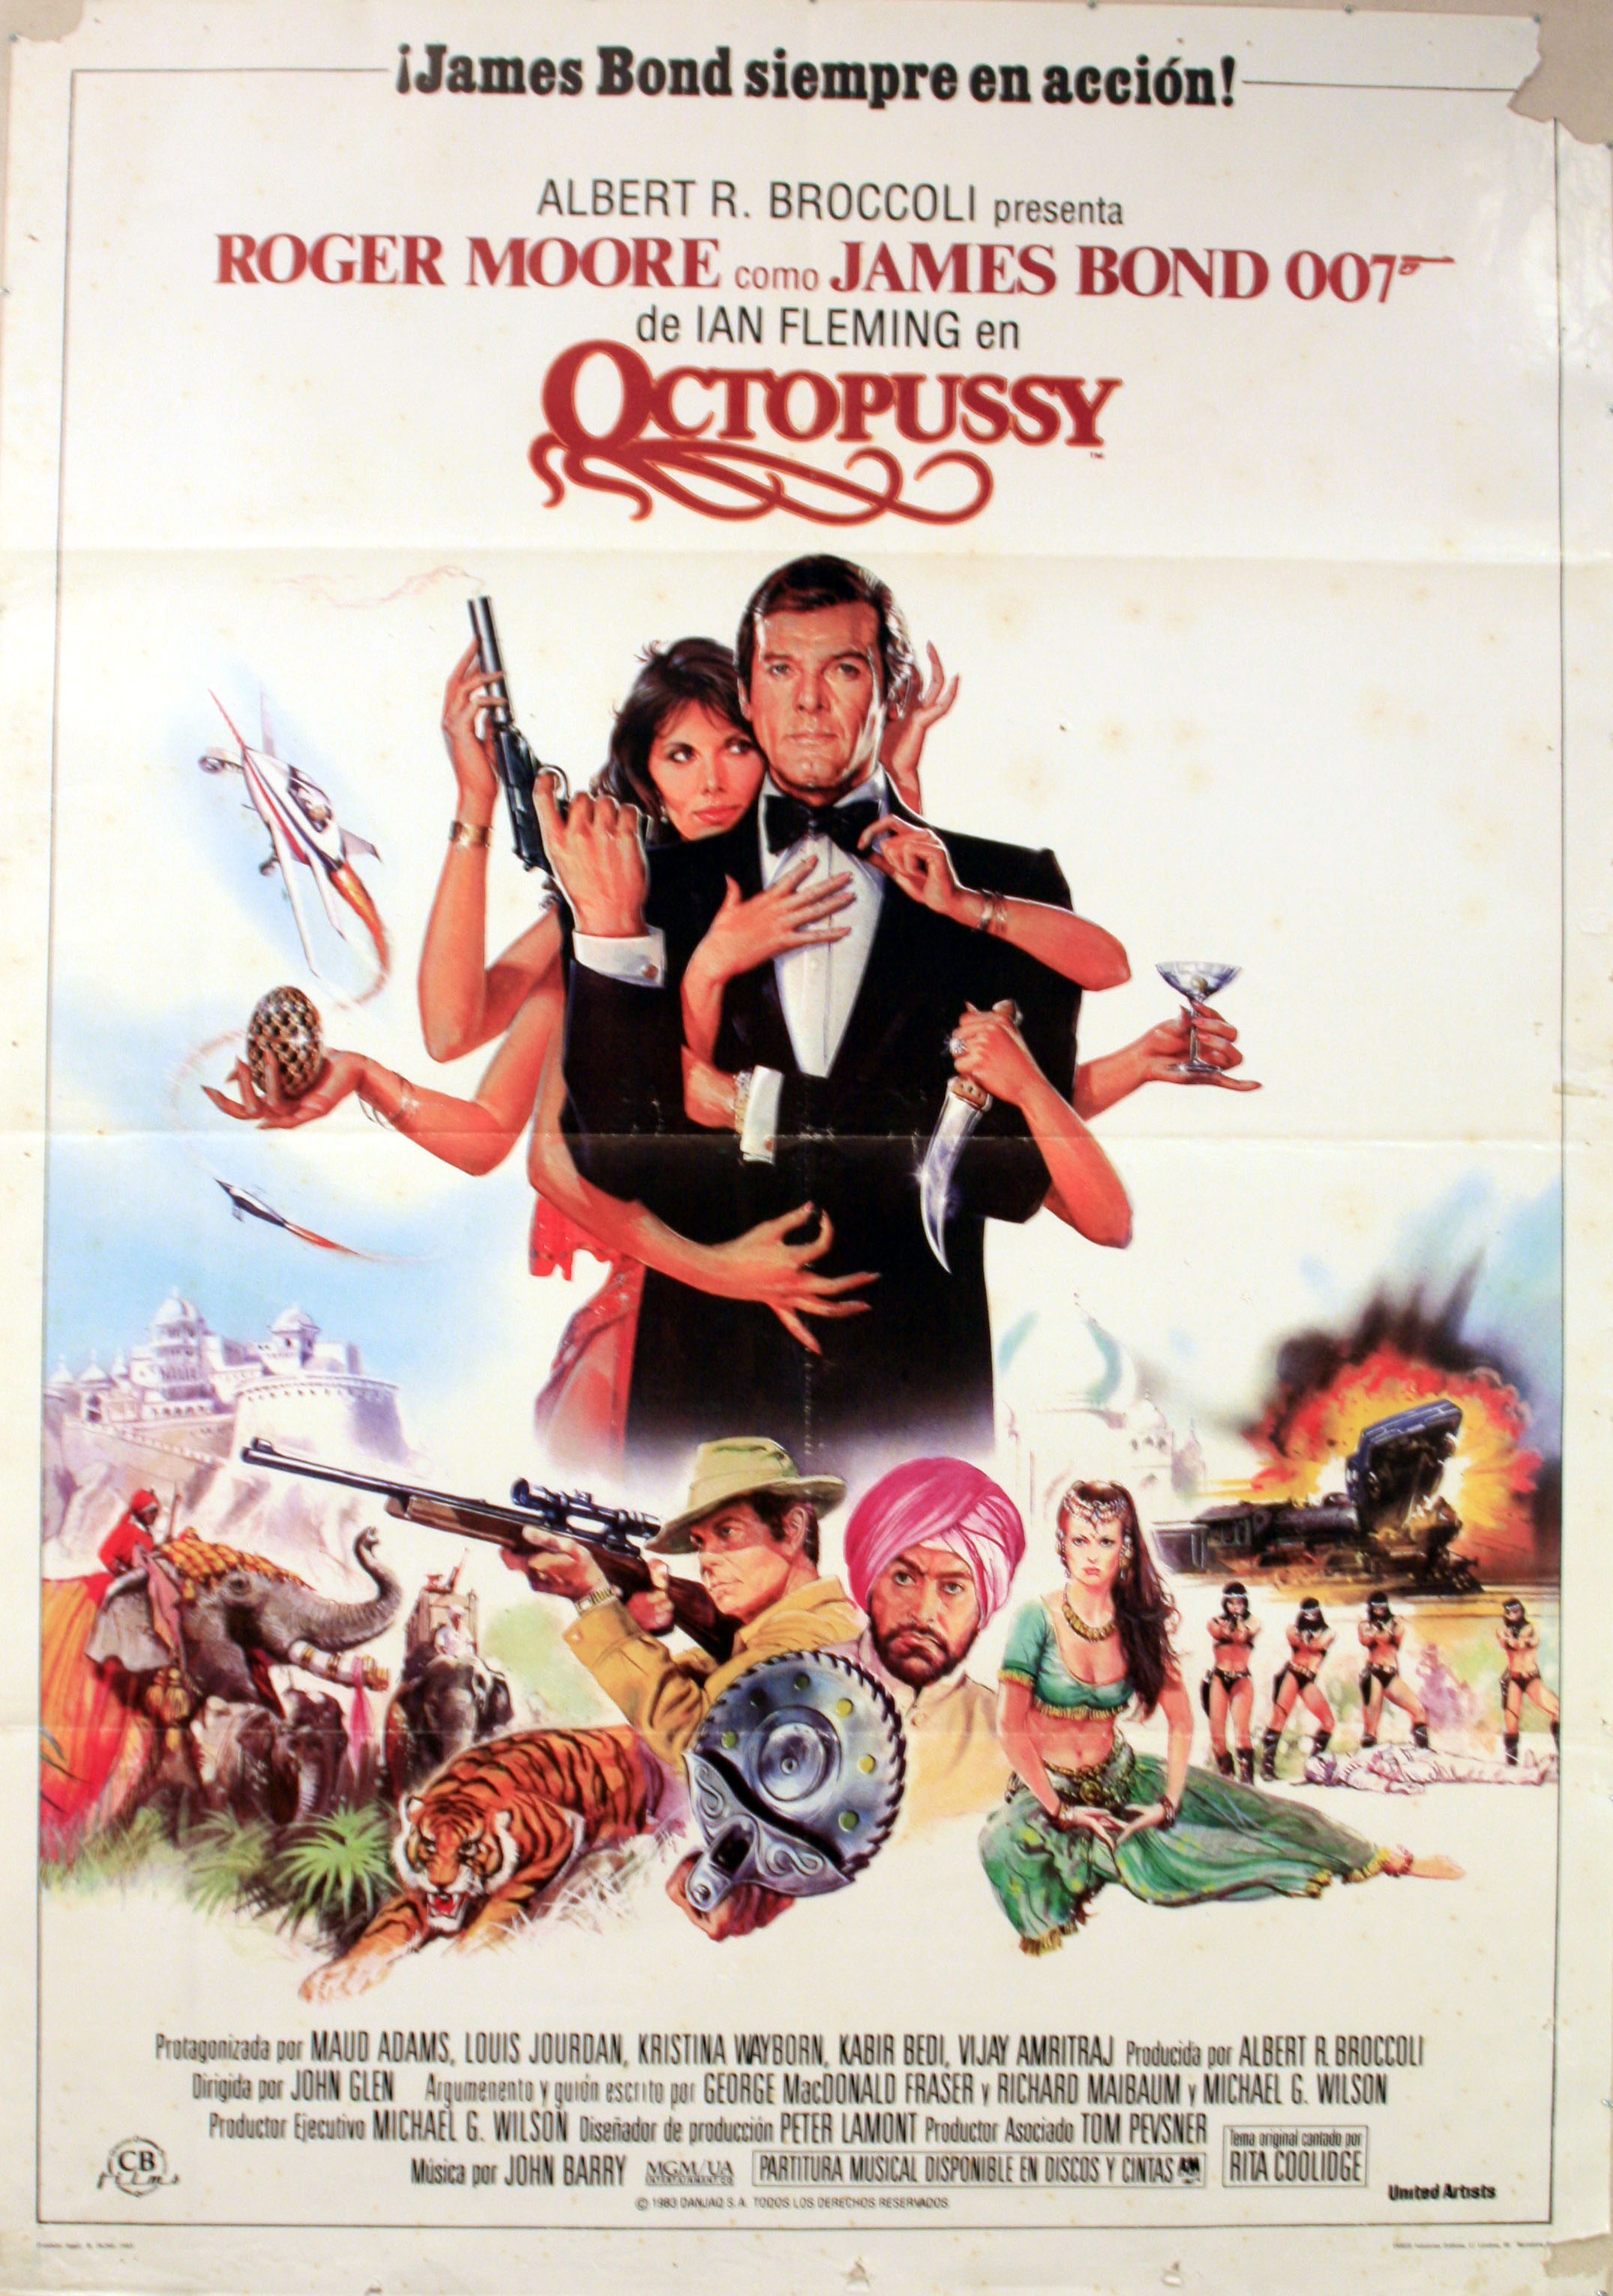 Movie Poster James Bond Octopussy Spanish release